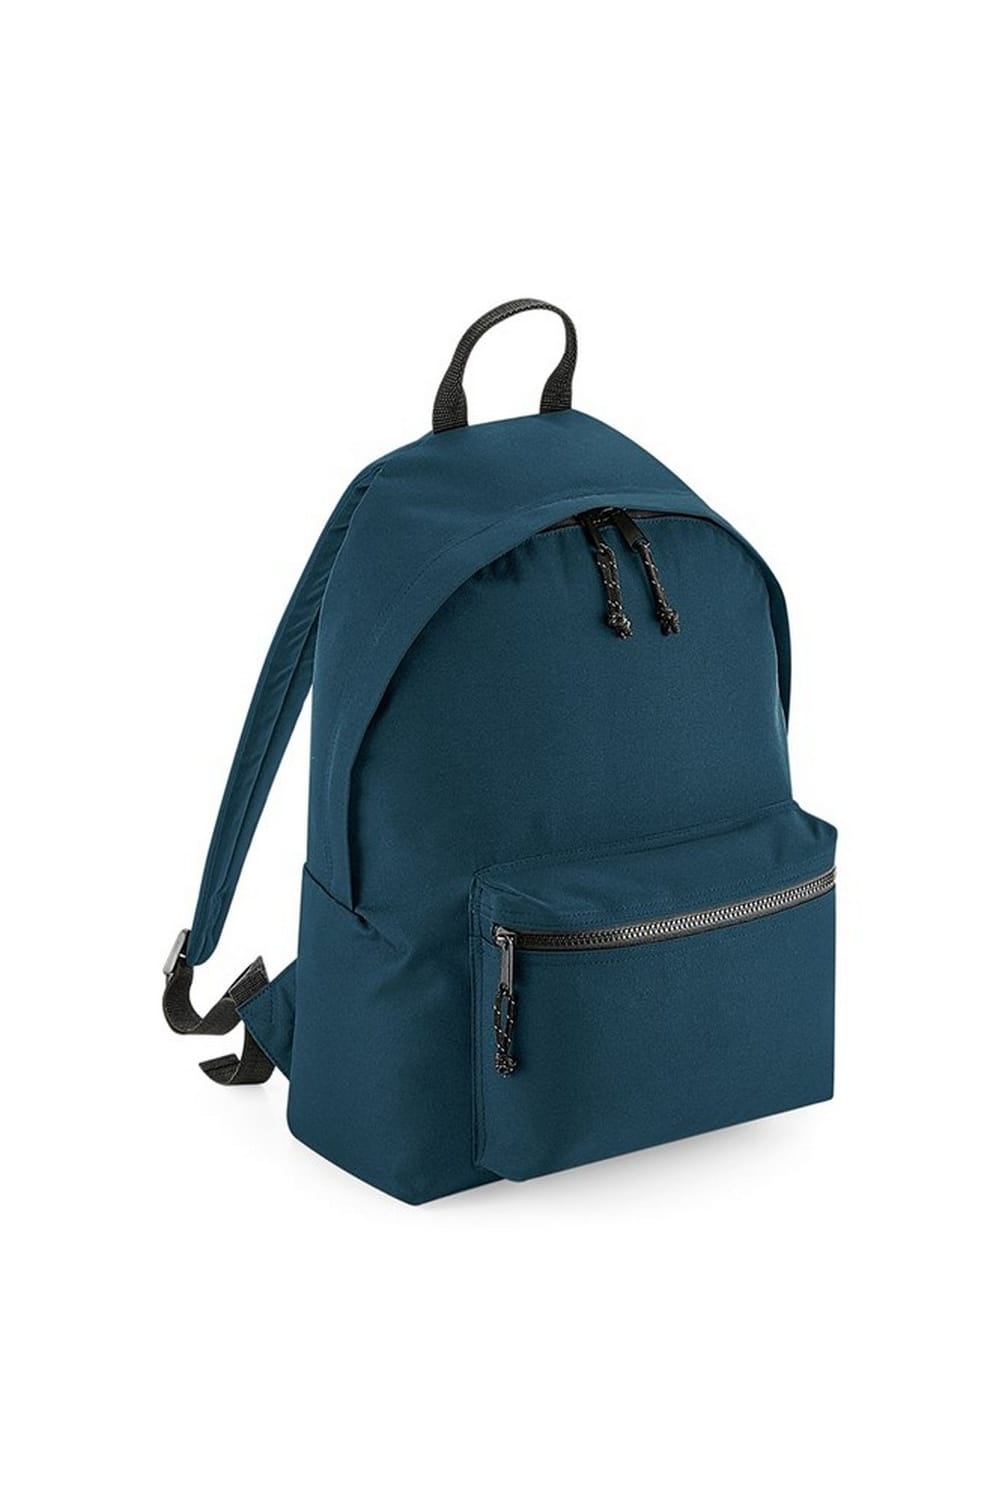 Recycled Backpack - Petrol Blue